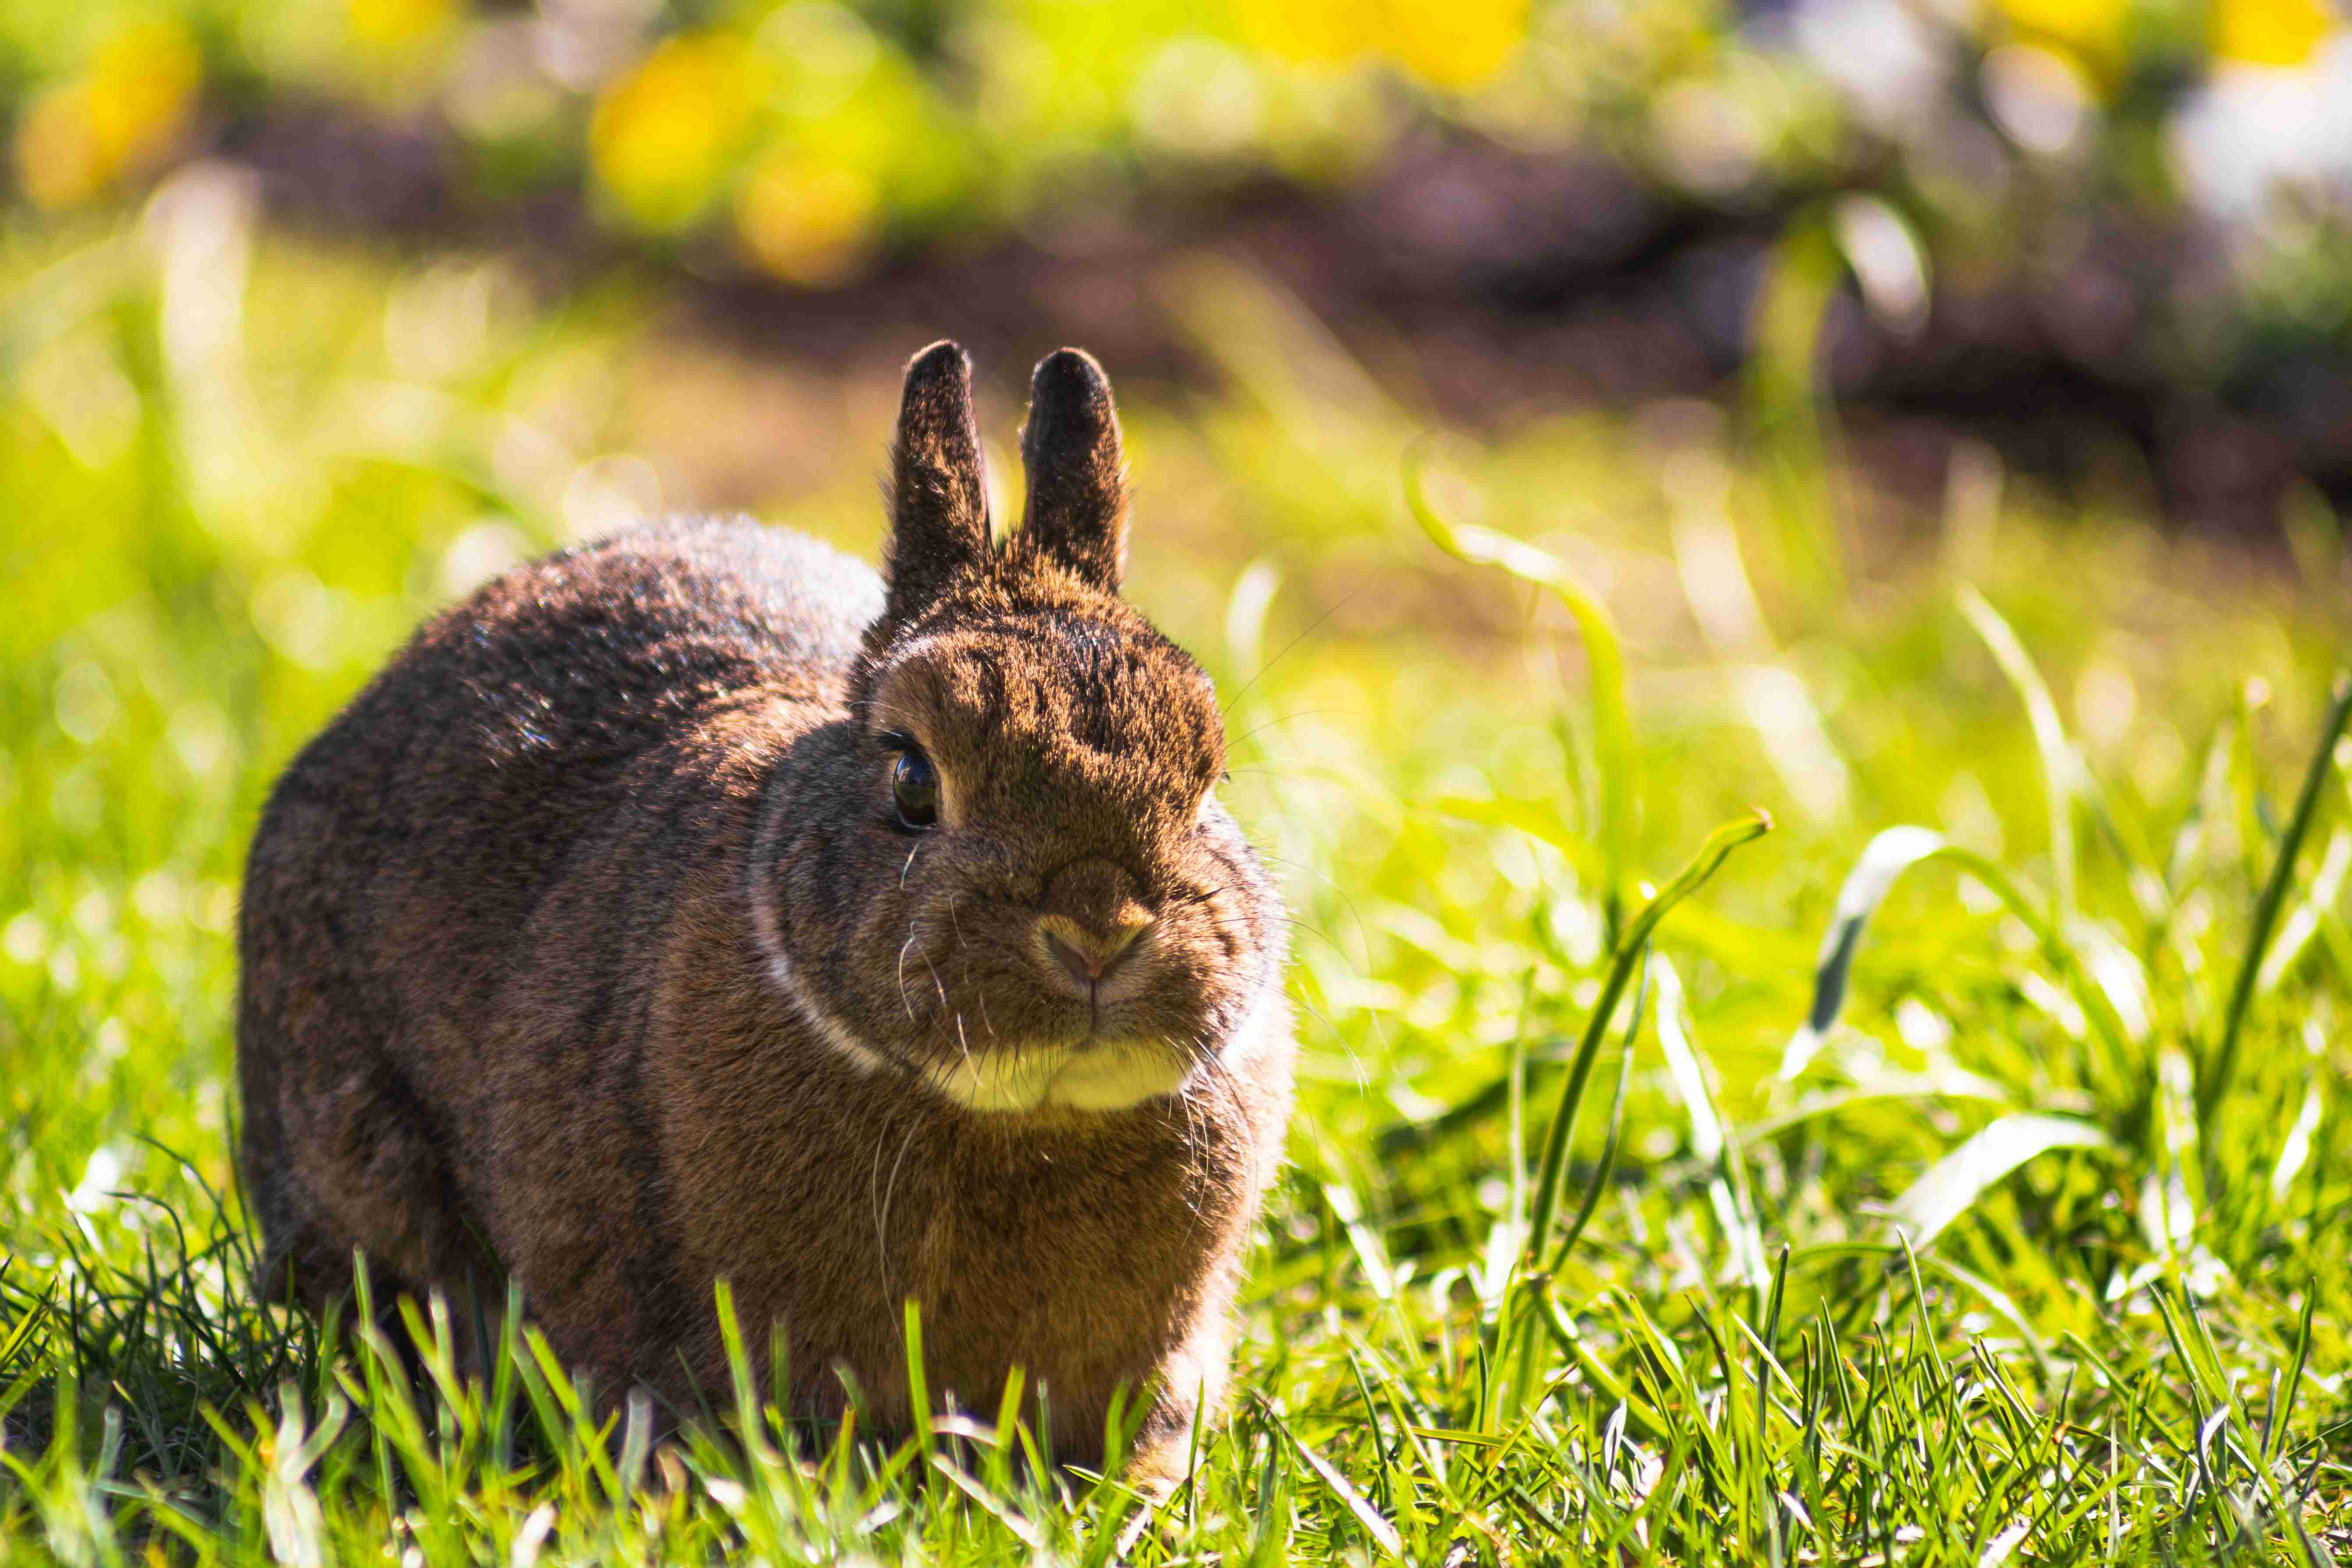 Keeping Your Bunny Cool: Tips to Prevent Heat Stroke in Rabbits